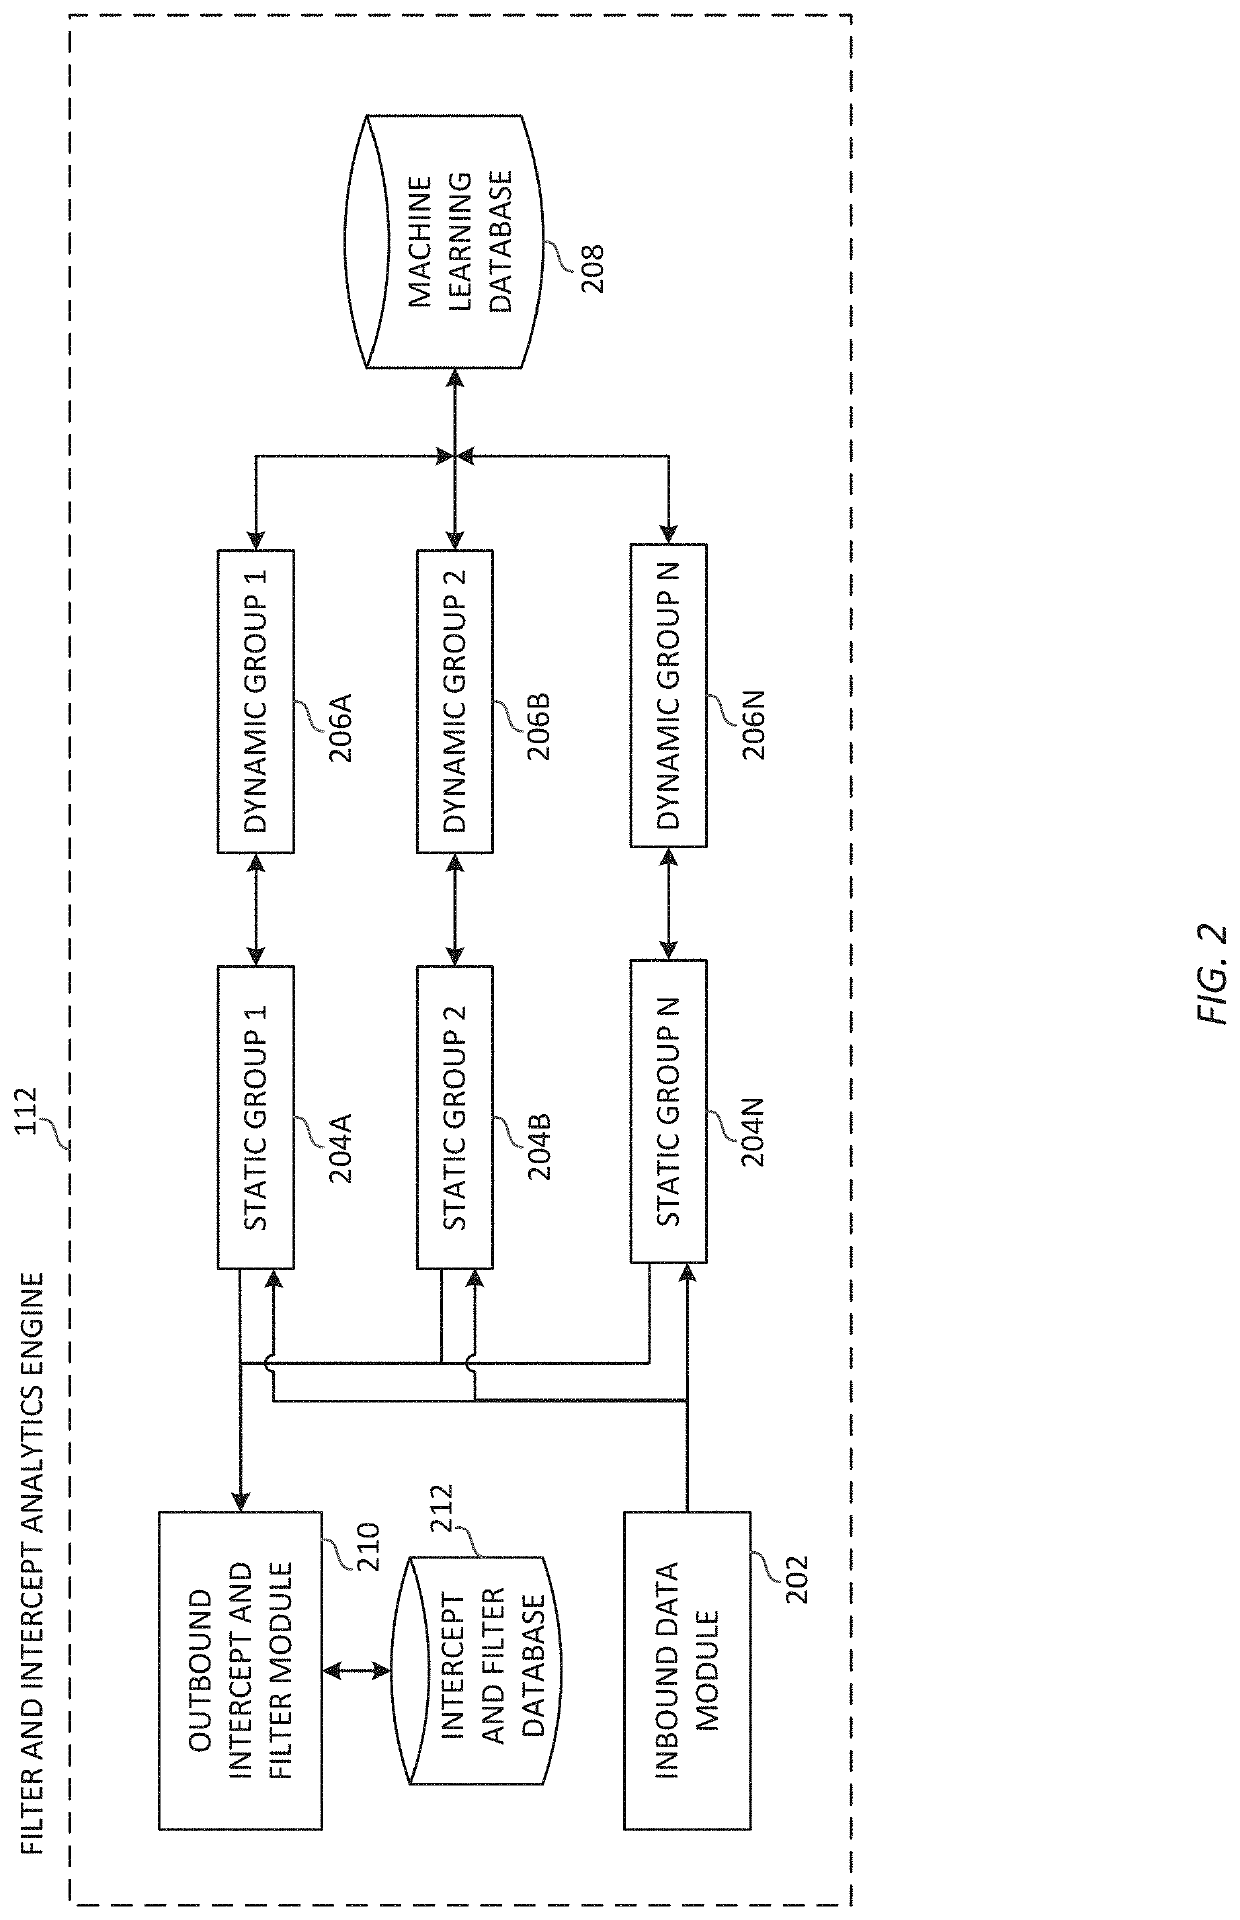 Systems and methods for displaying filters and intercepts leveraging a predictive analytics architecture